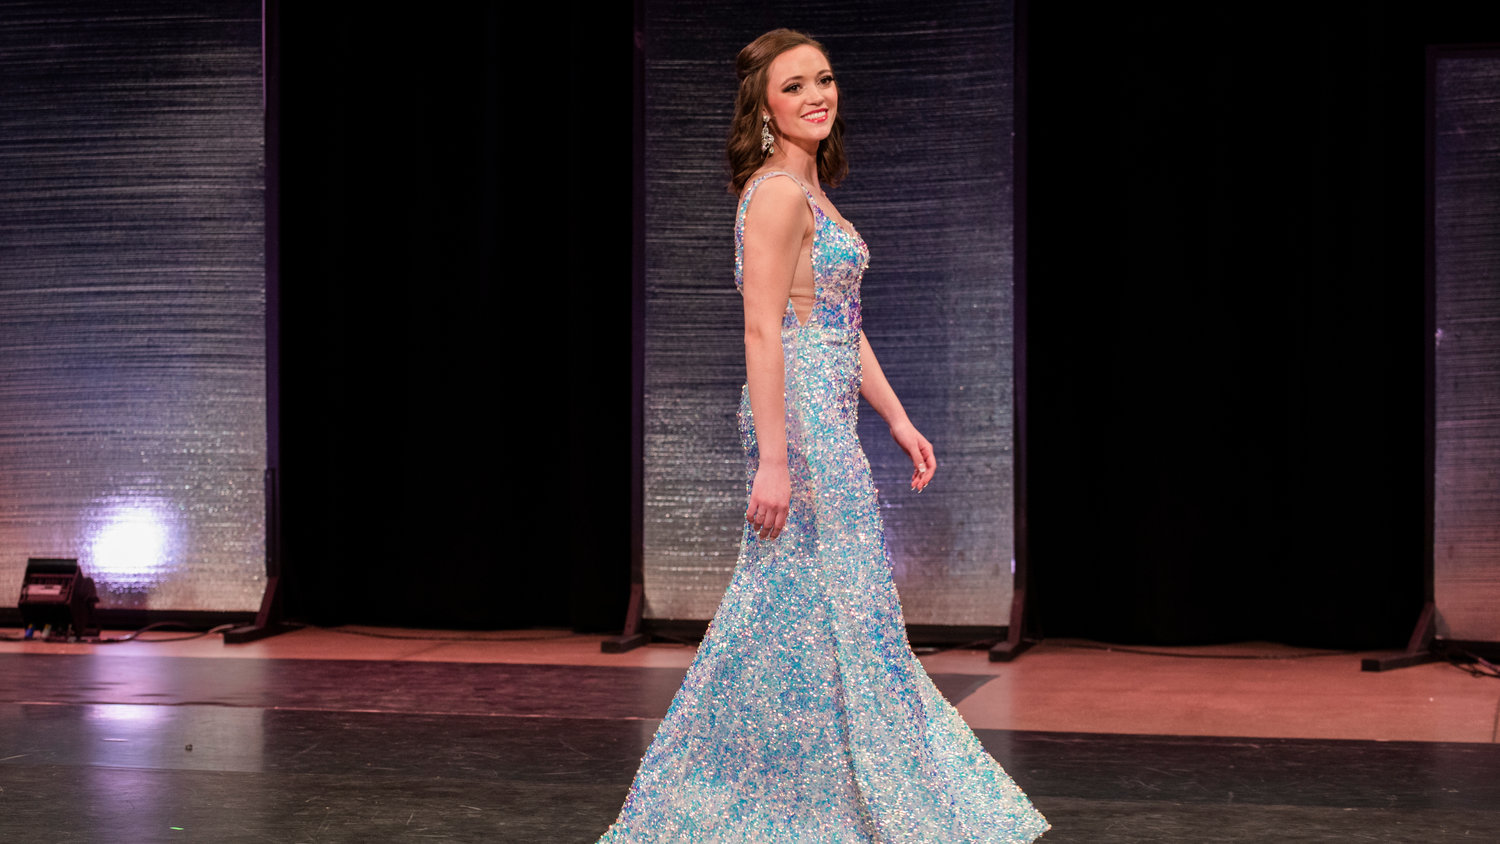 Briana Rasku competes in the Red Carpet portion of a Miss Lewis County event held at Centralia High School Saturday night.